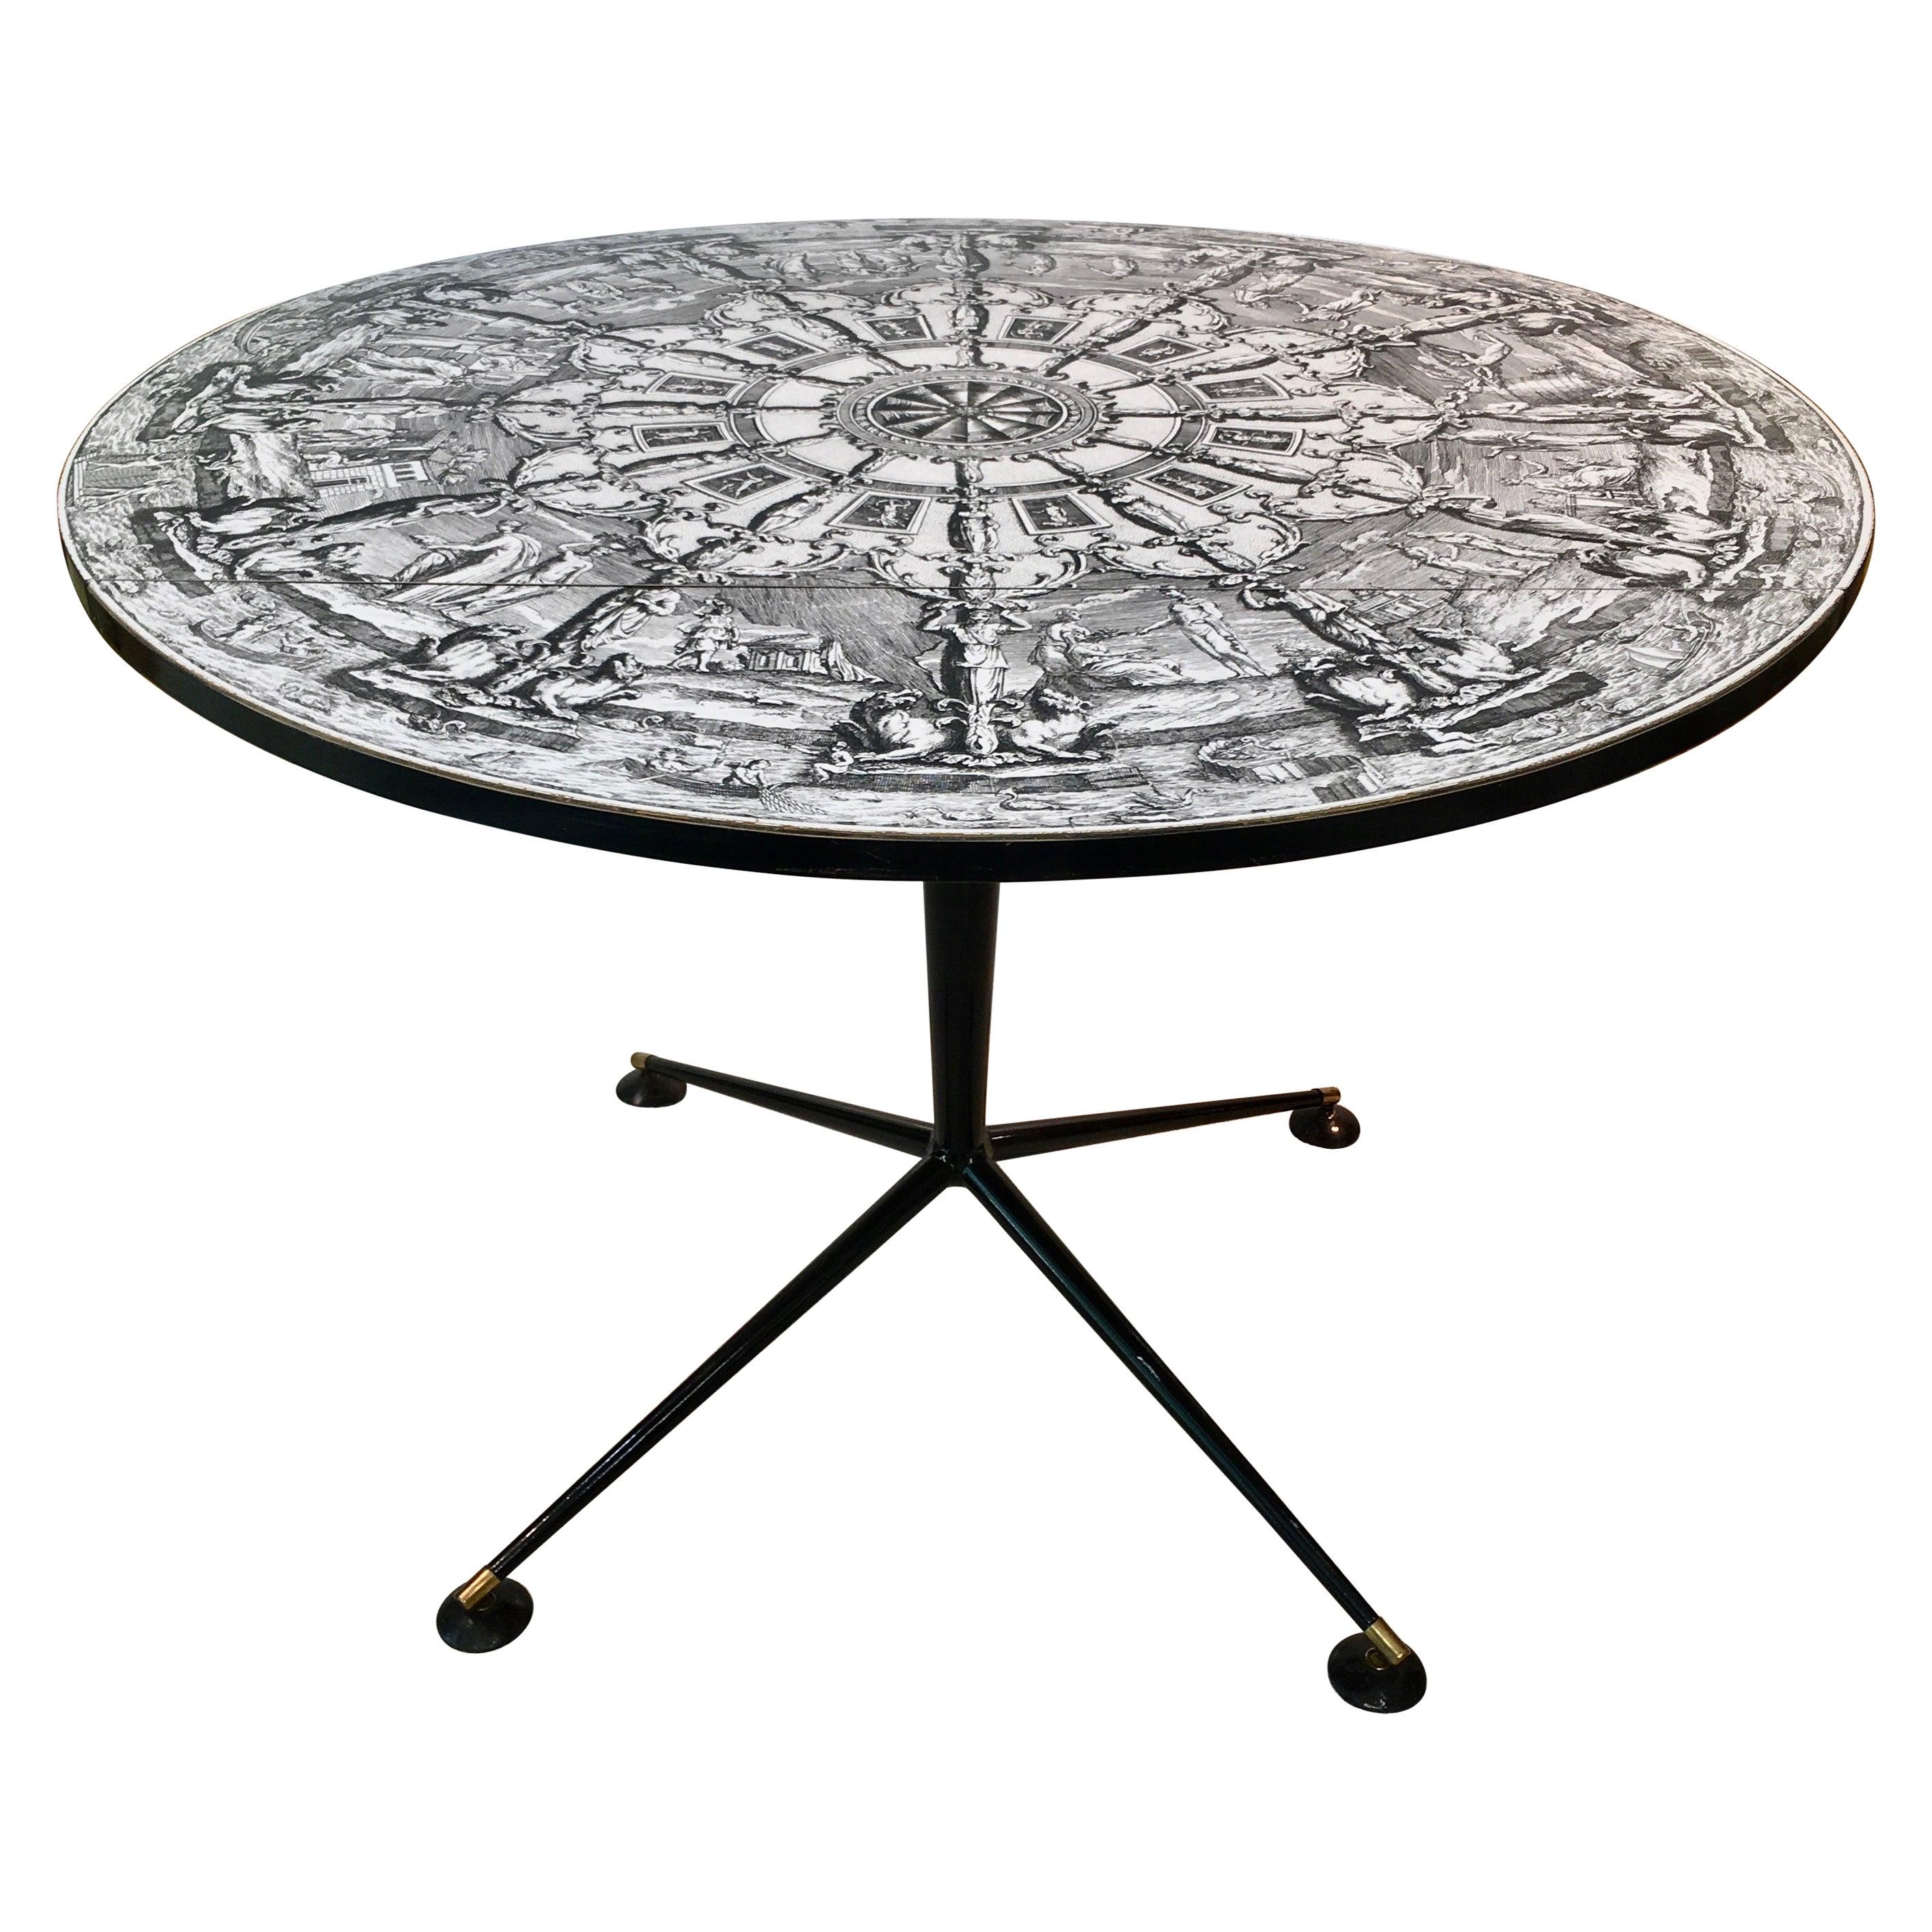 Andrew J. Milne for Heal's Round Drop Leaf Table For Sale